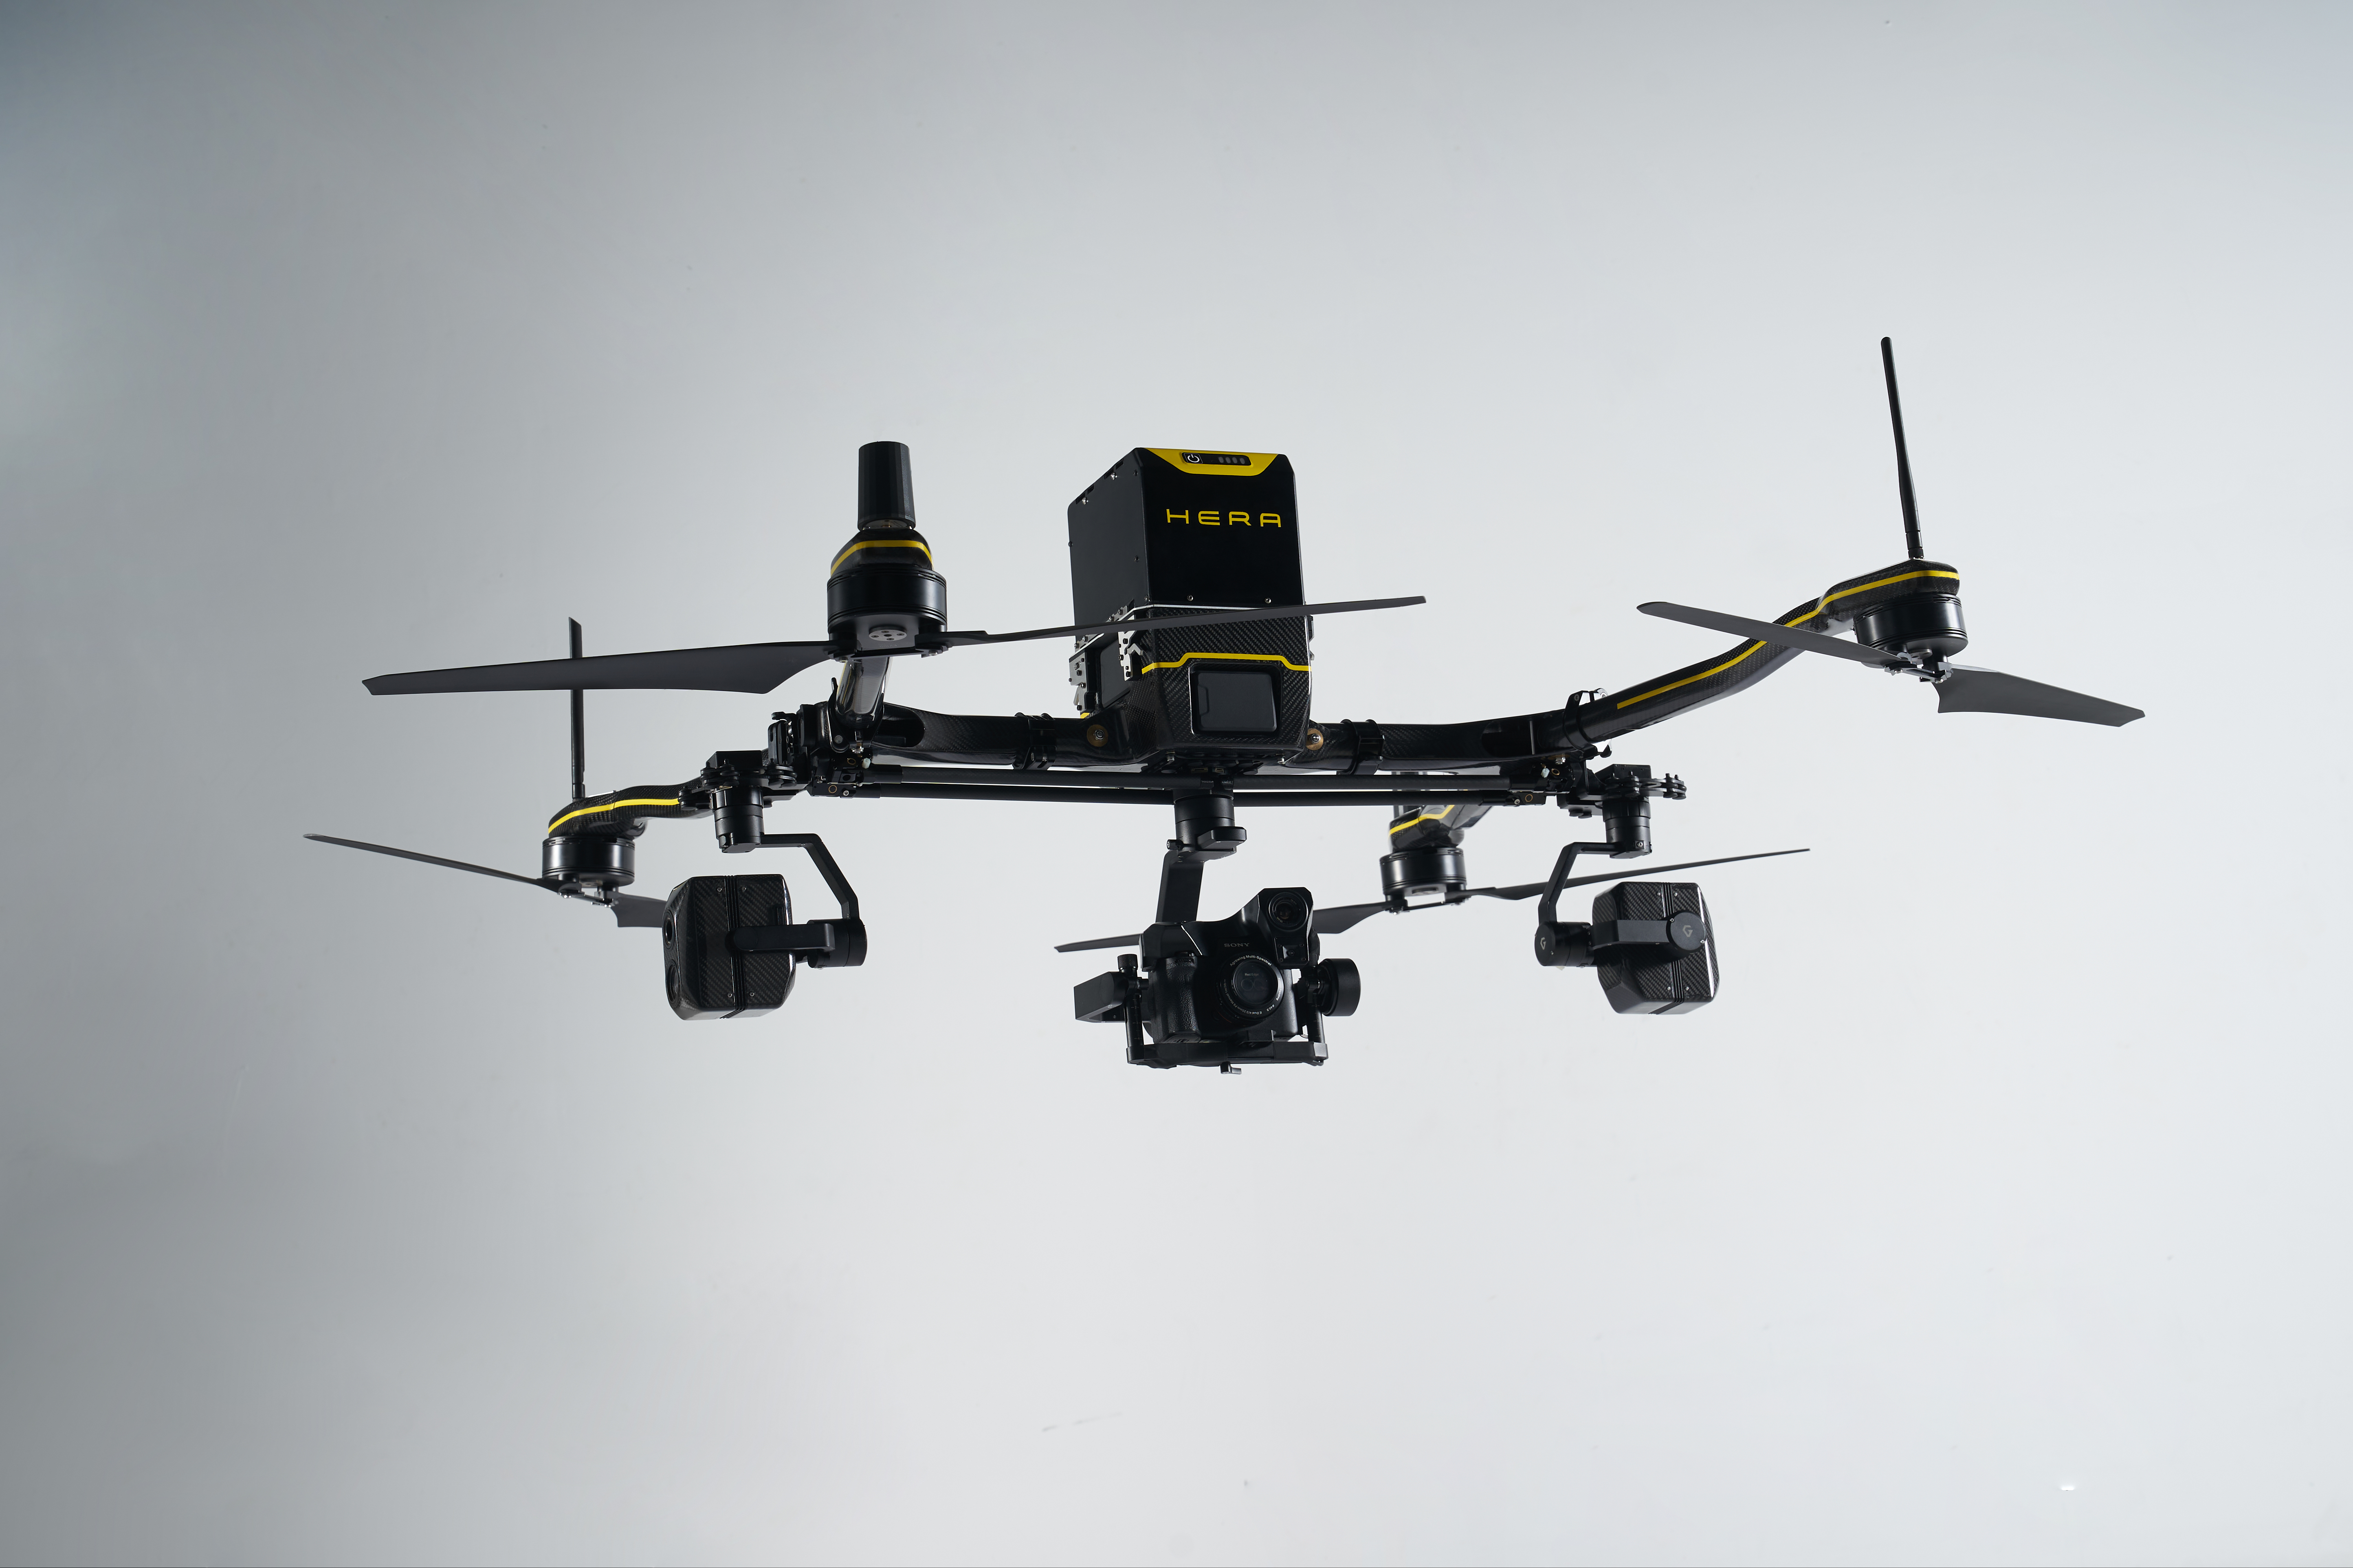 The Hera unmanned aerial vehicle is a multi-purpose drone. Photo: CT / Tuoi Tre